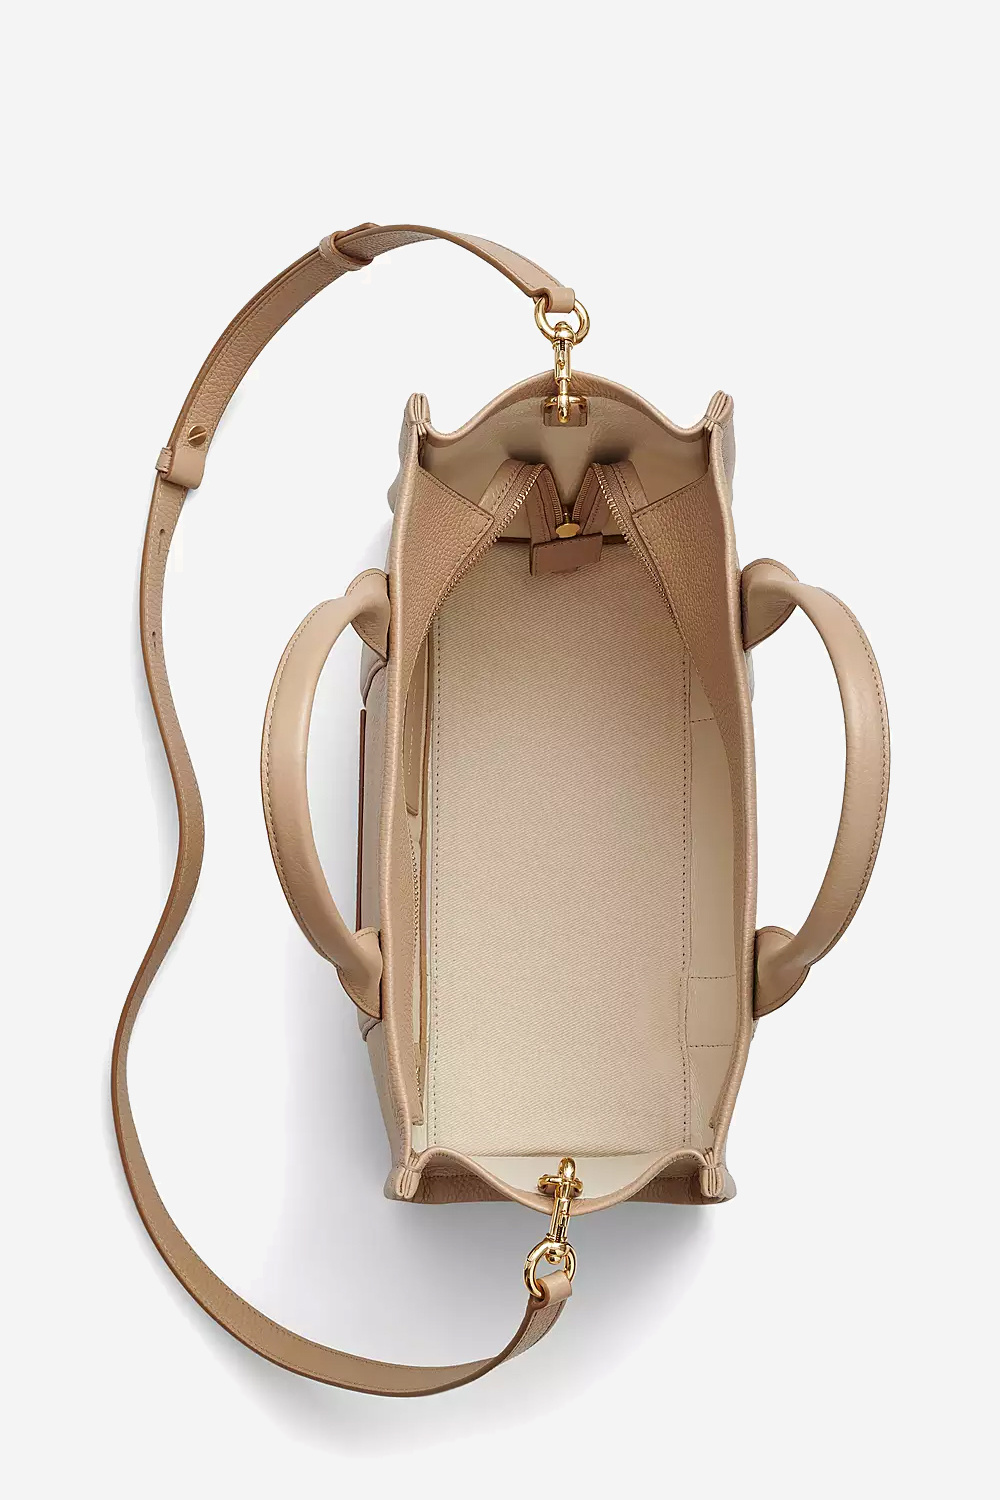 Marc Jacobs The Leather Tote Bag in Camel